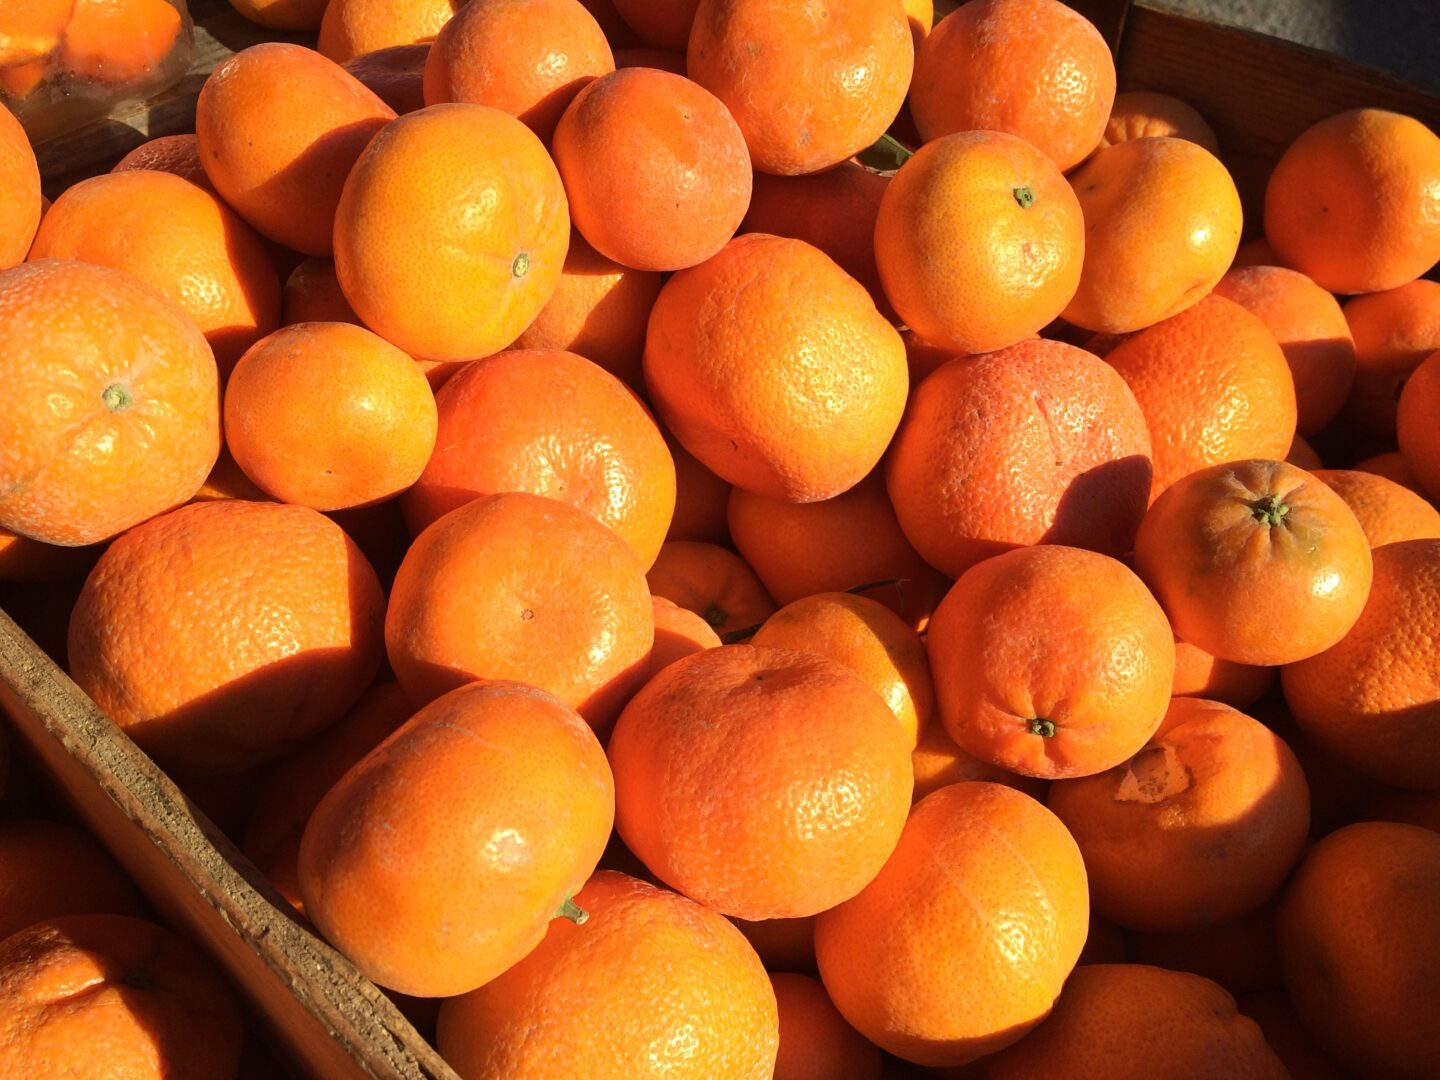 A pile of oranges in a wooden crate.